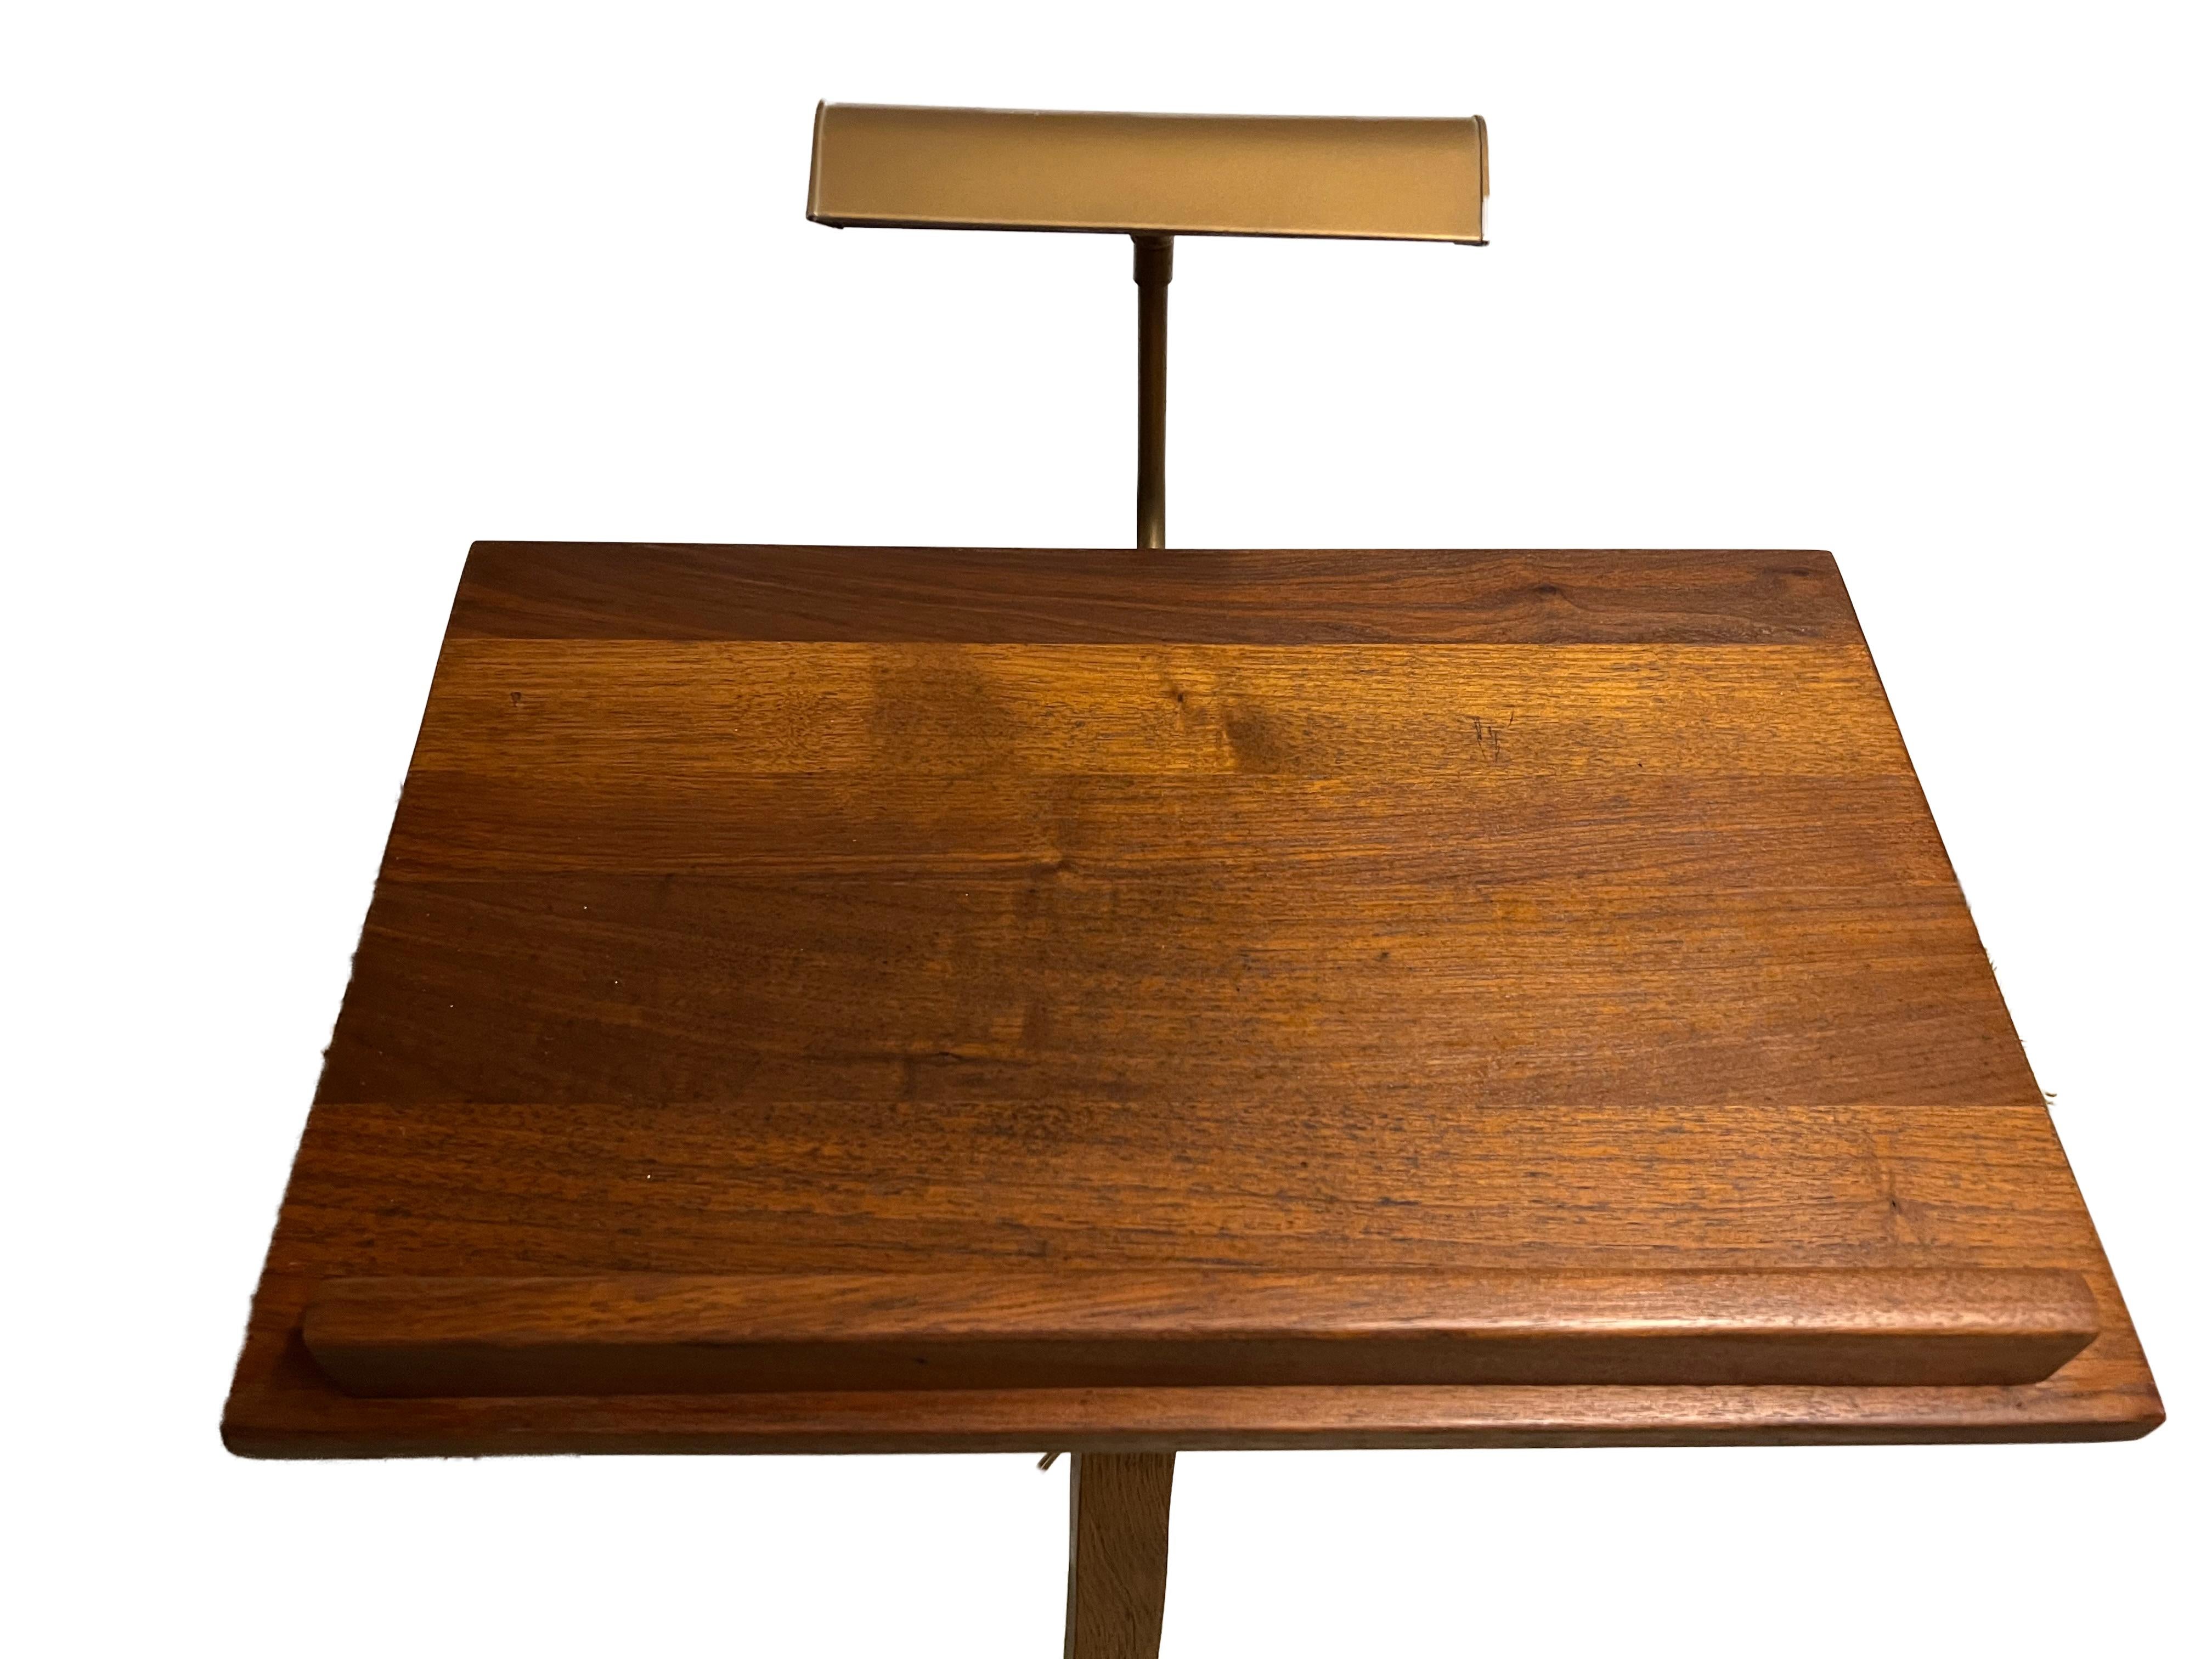 A very fine quality piece, the stand has an upright column that carries an inclined walnut table top, with a concealed book rest and a brass light.
The tabletop cannot be adjusted.

This handsome Music Stand would also be a useful piece to hold